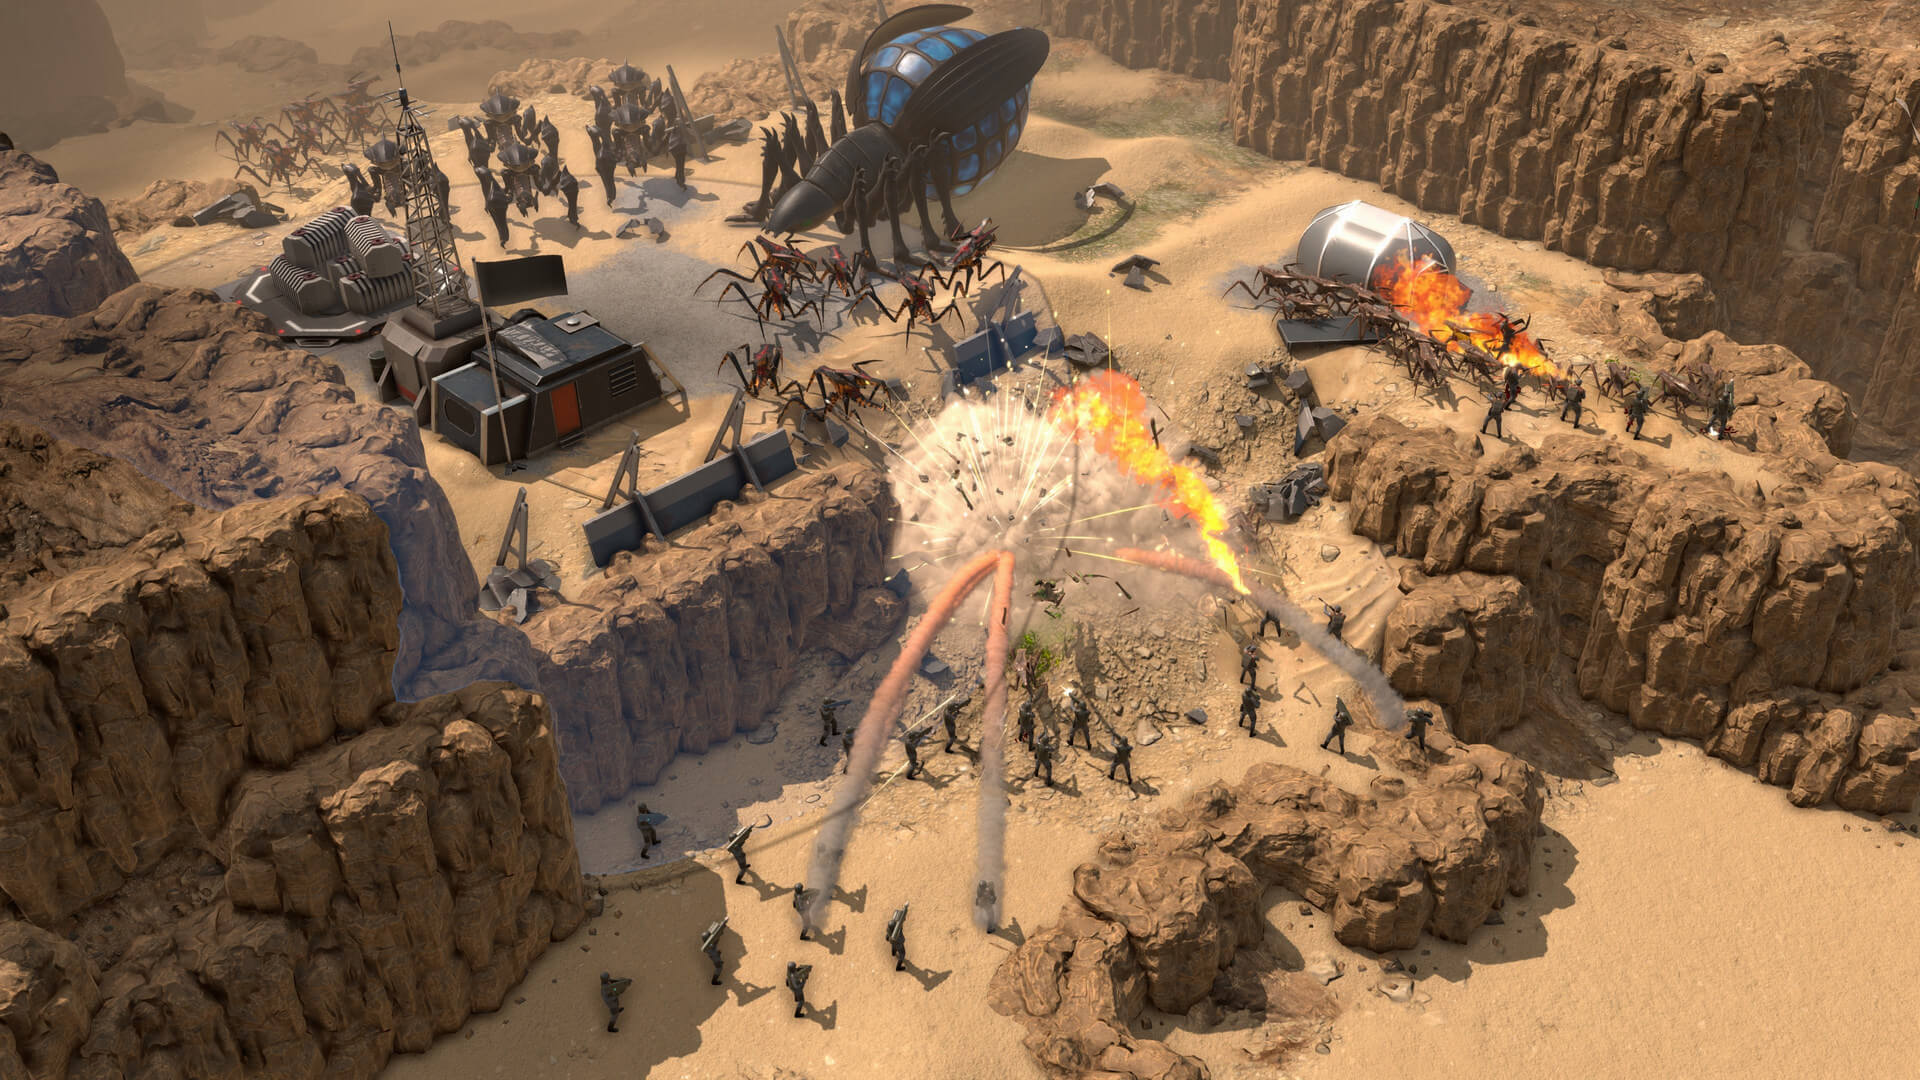 New gameplay trailer released for Starship Troopers Terran Command